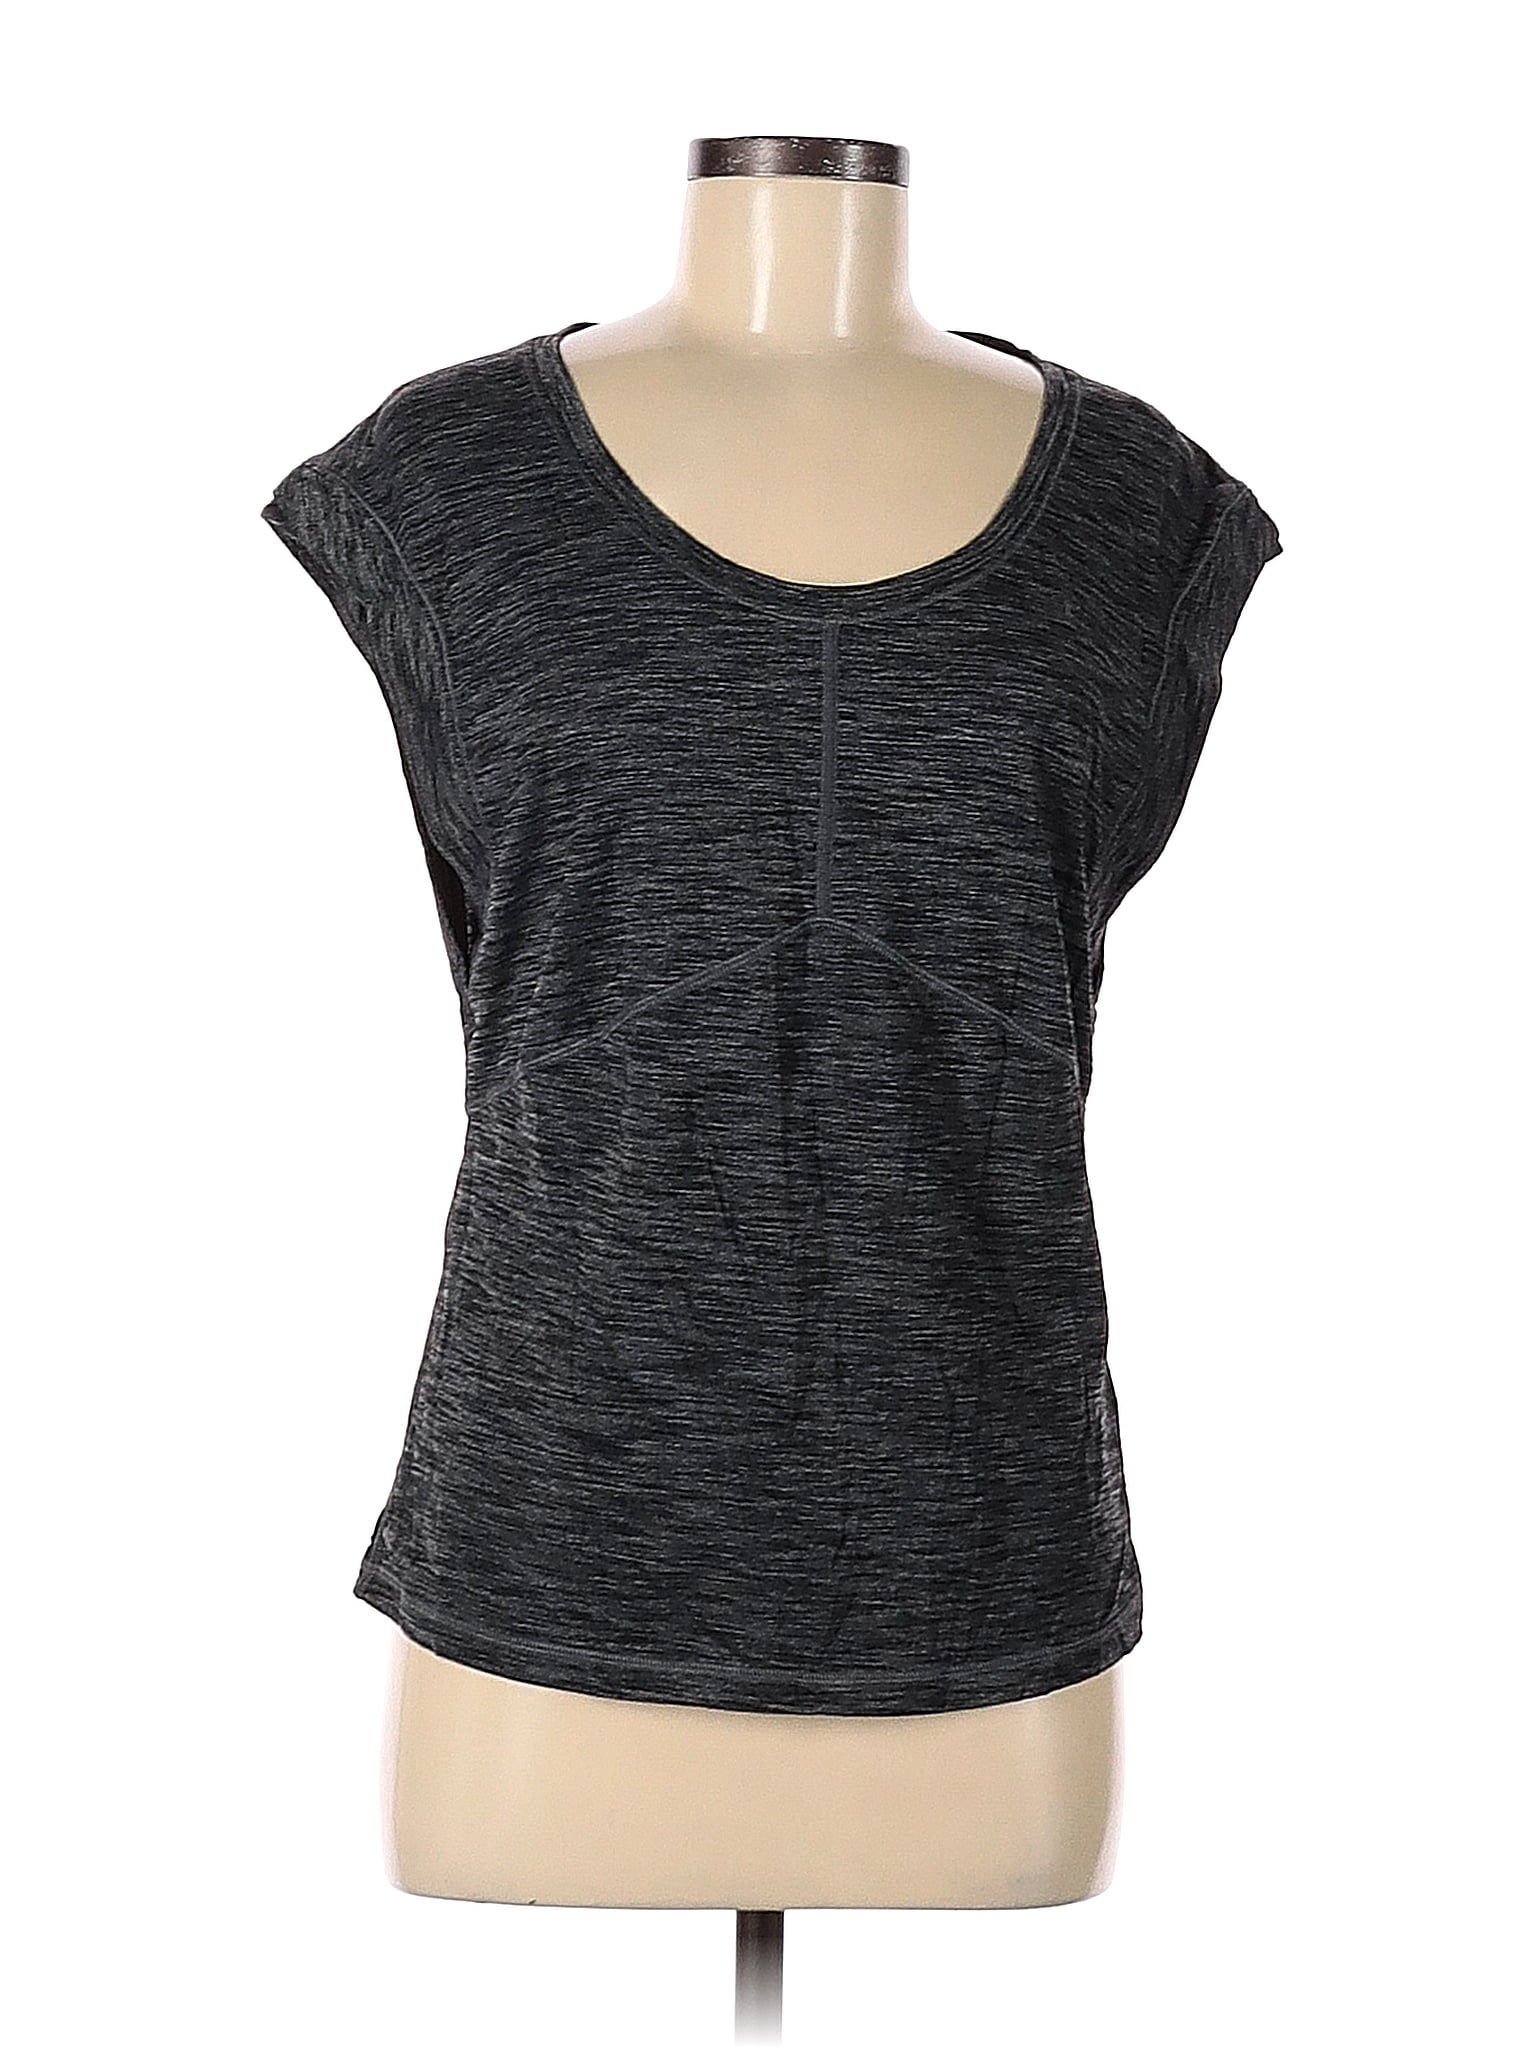 Pre-Owned Lululemon Athletica Womens Size 8 Active Nigeria